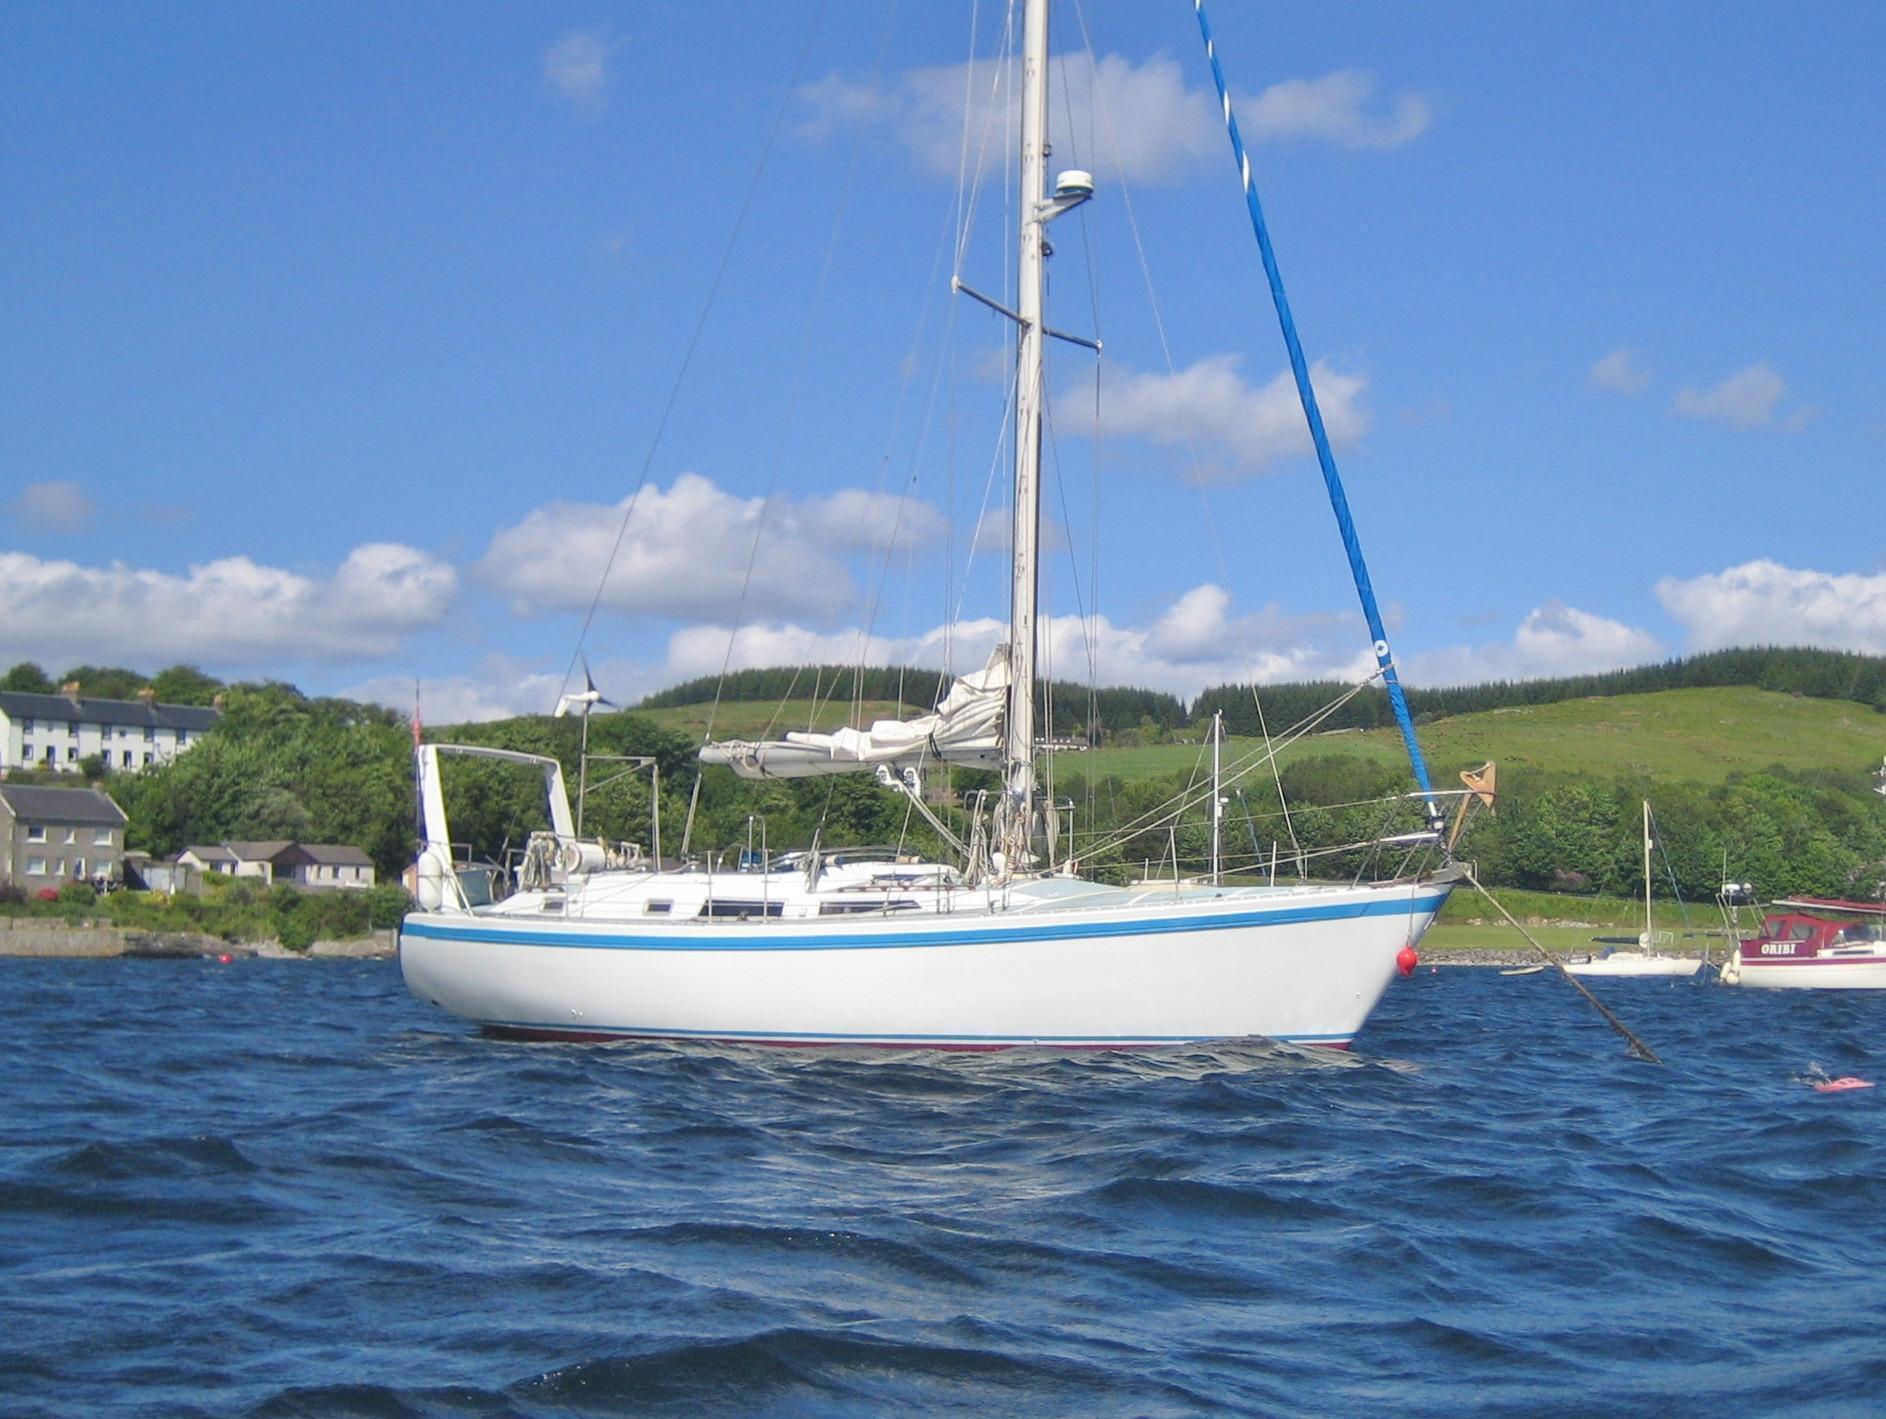 Crossbow 40 Cutter Rigged Sloop, North Ayrshire